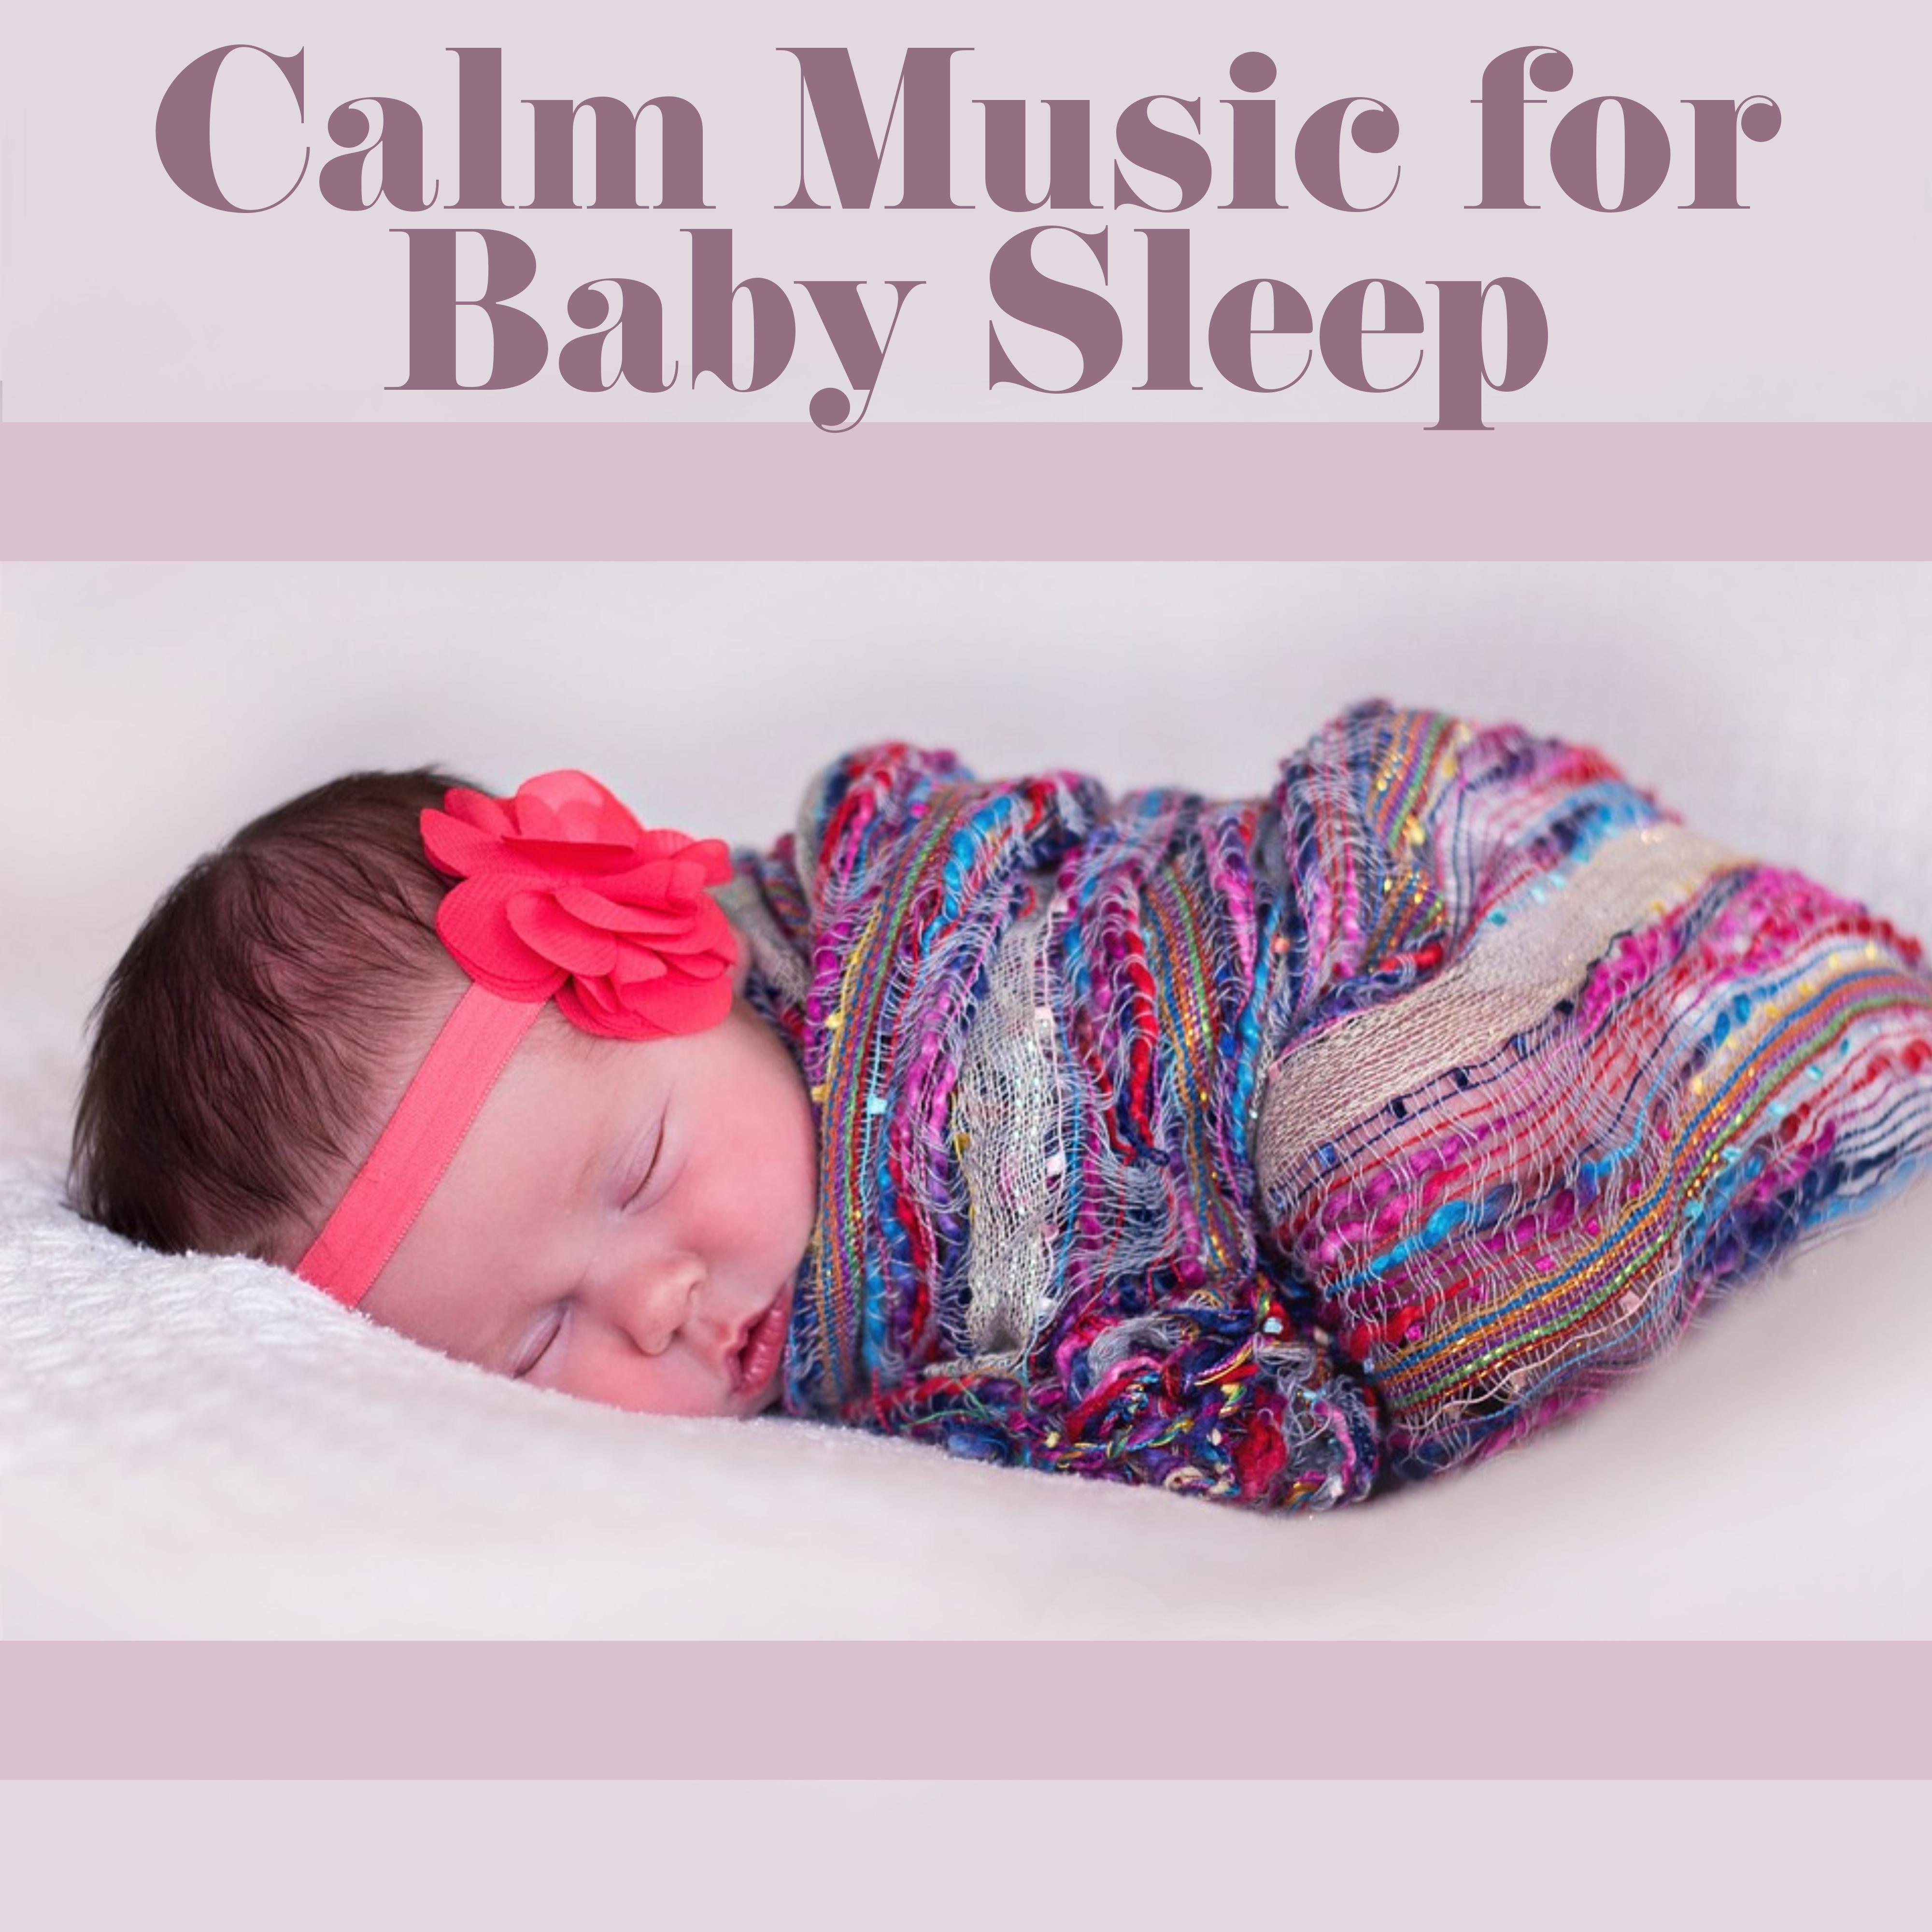 Calm Music for Baby Sleep  Soft New Age for Sleeping, Calm Night, Cure Insomnia, Baby Lullaby